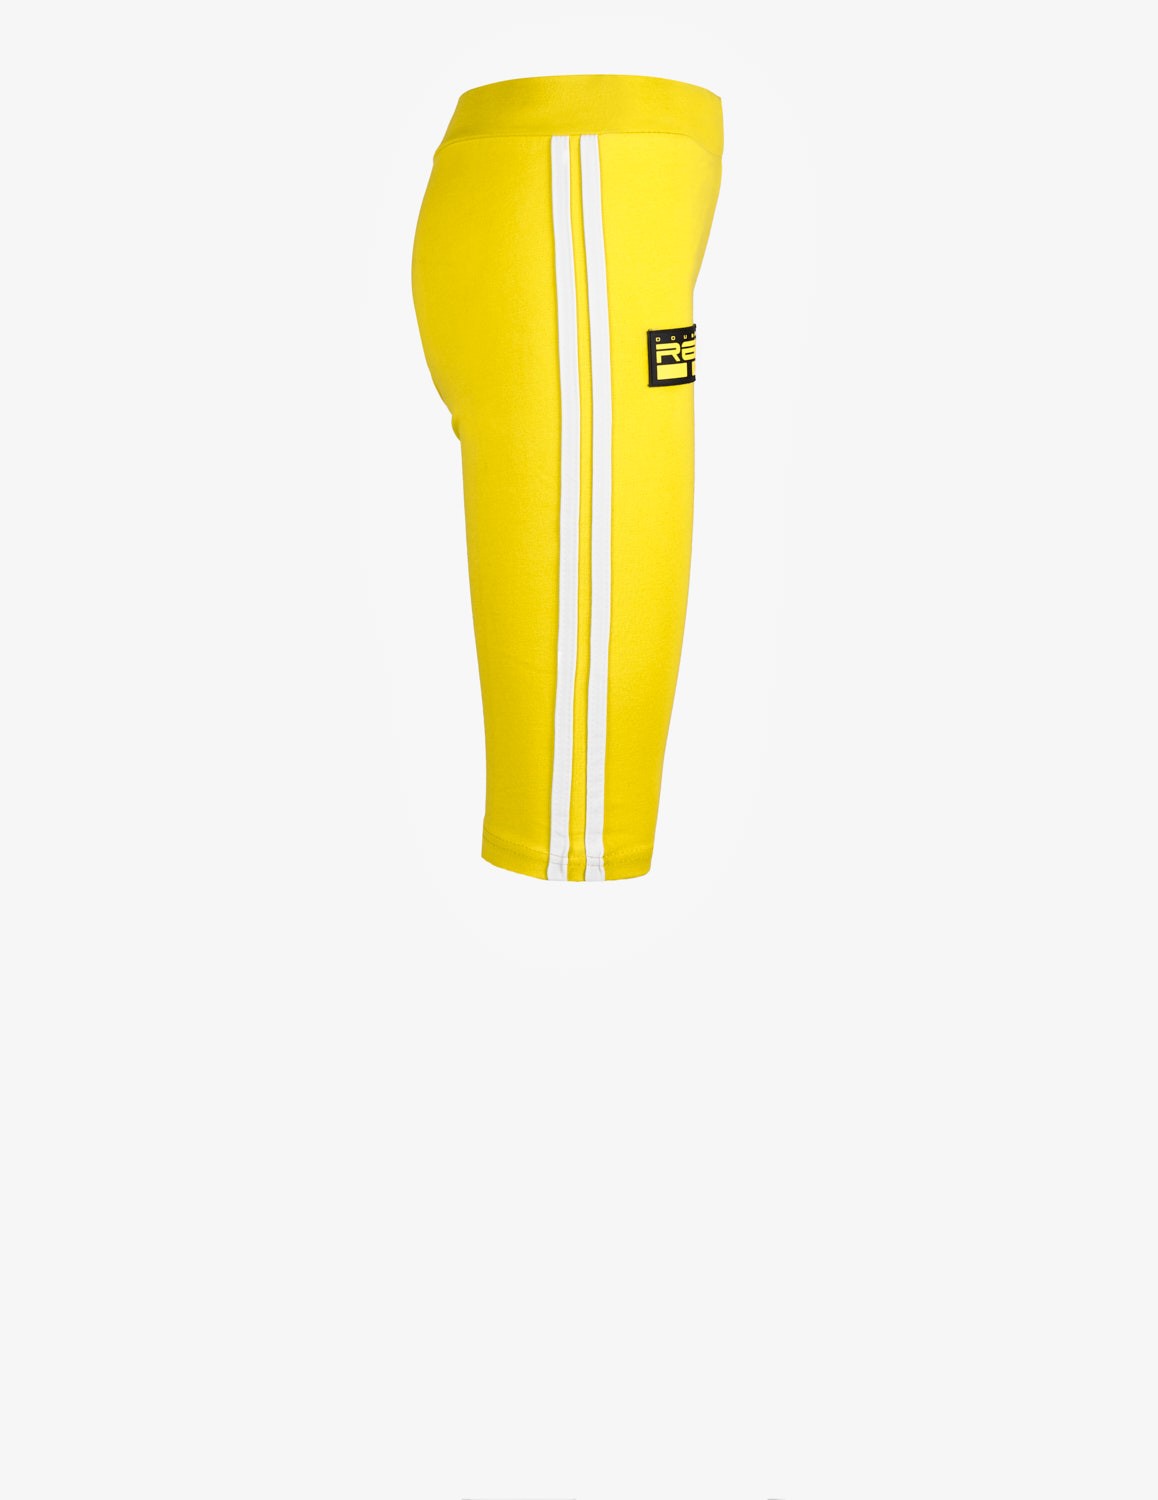 Leggins SPORT IS YOUR GANG™ Yellow